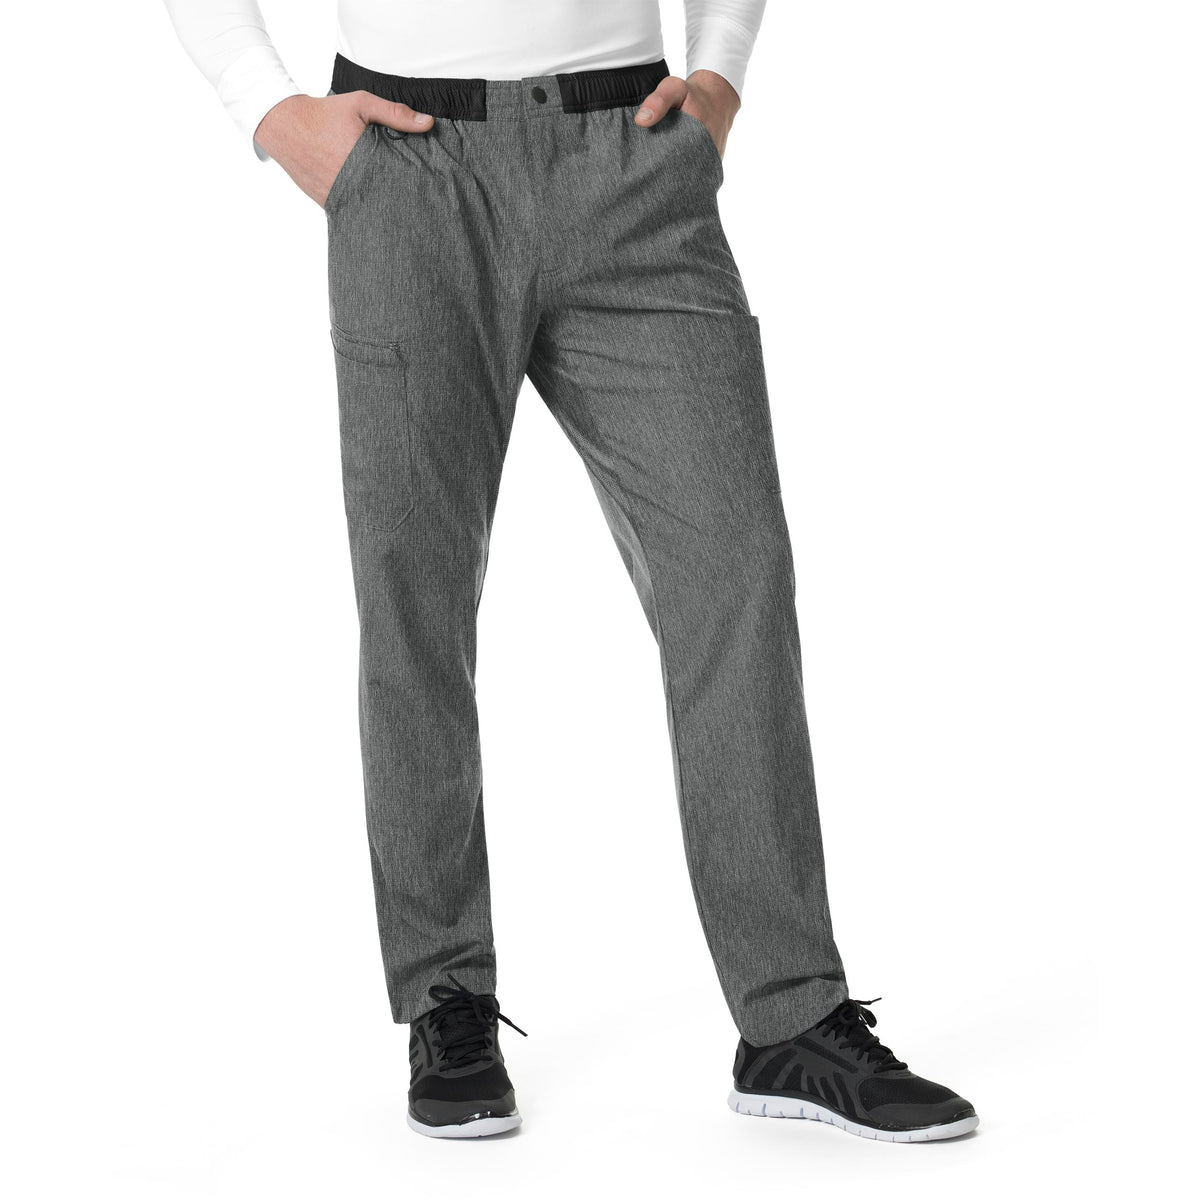 Force Liberty Men's Athletic Cargo Scrub Pant Charcoal Heather